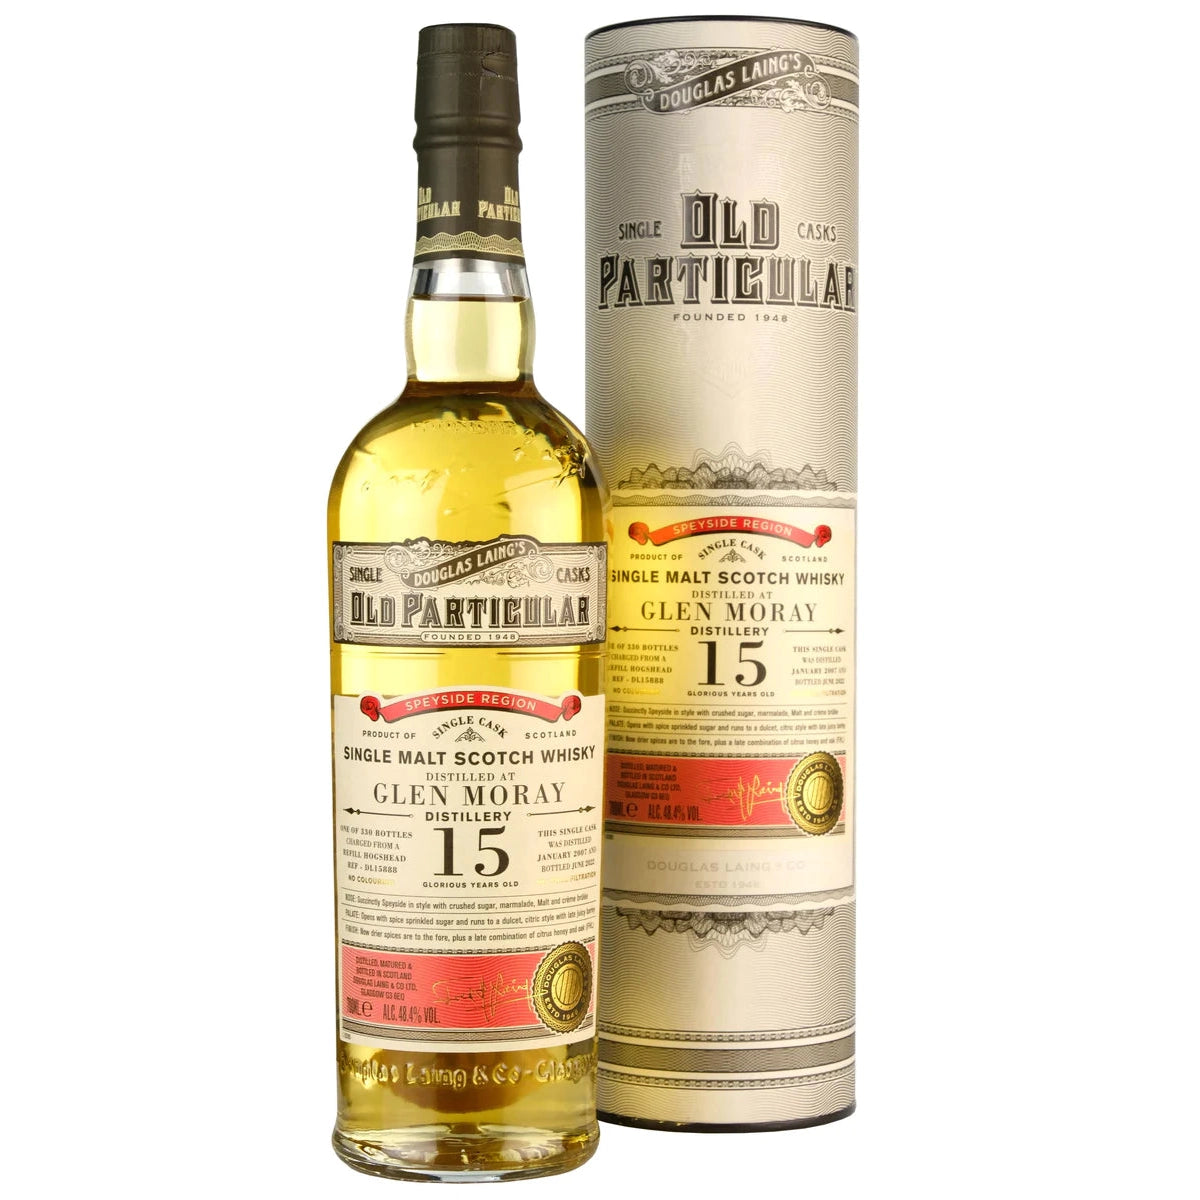 Douglas Laing OLD PARTICULAR Glen Moray 15 Years Old Single Cask 2007 48,4% Vol. 0,7l in Giftbox